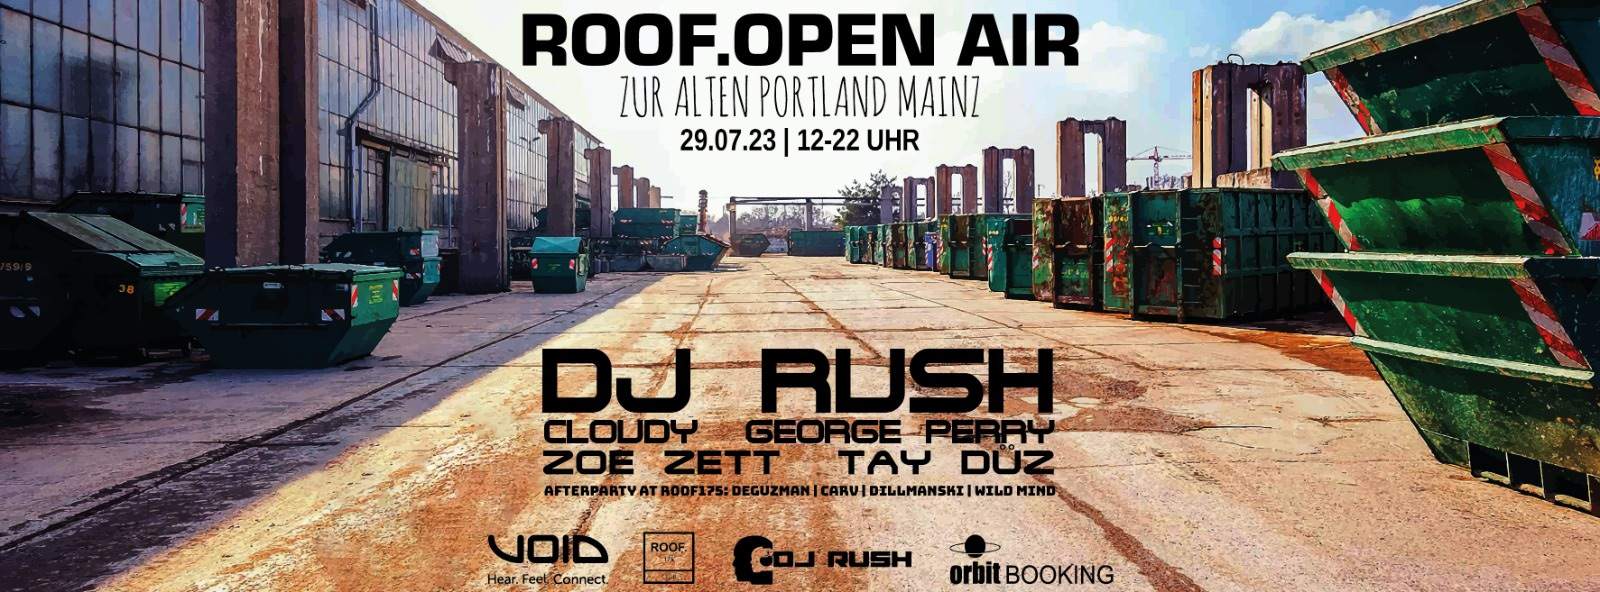 ROOF. Open Air with DJ Rush & Cloudy - Página frontal